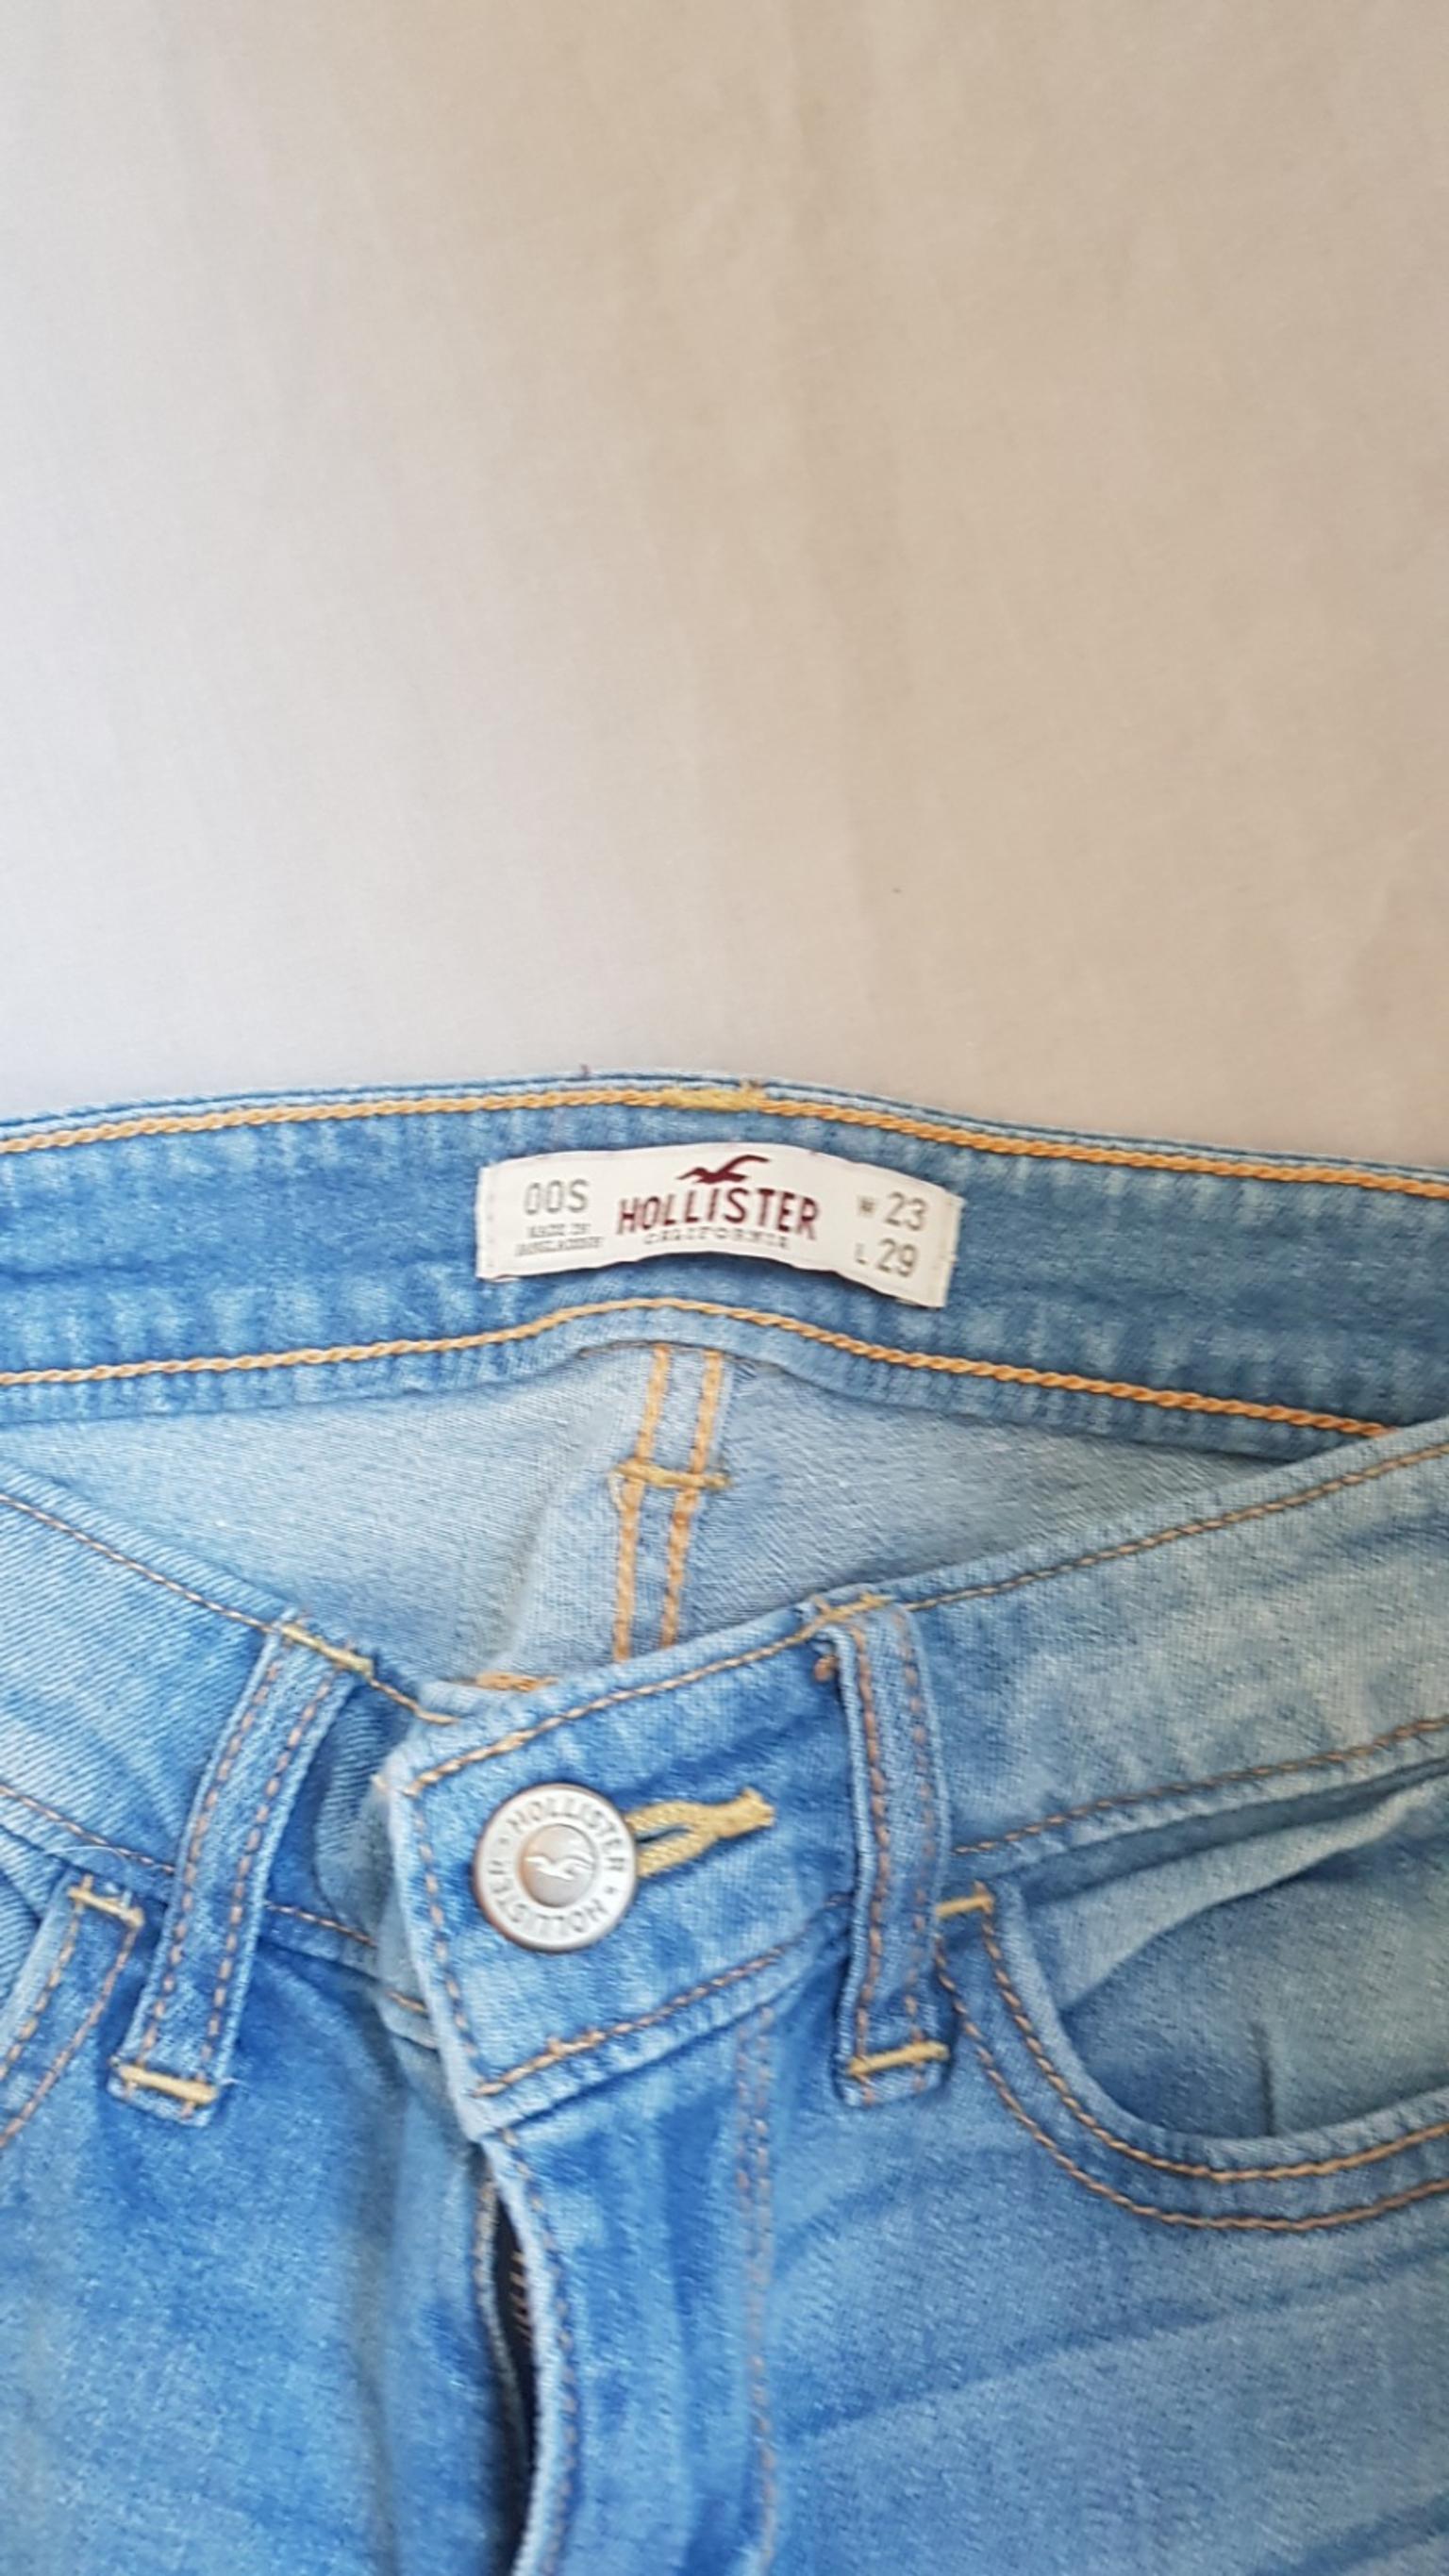 size 29 in hollister jeans